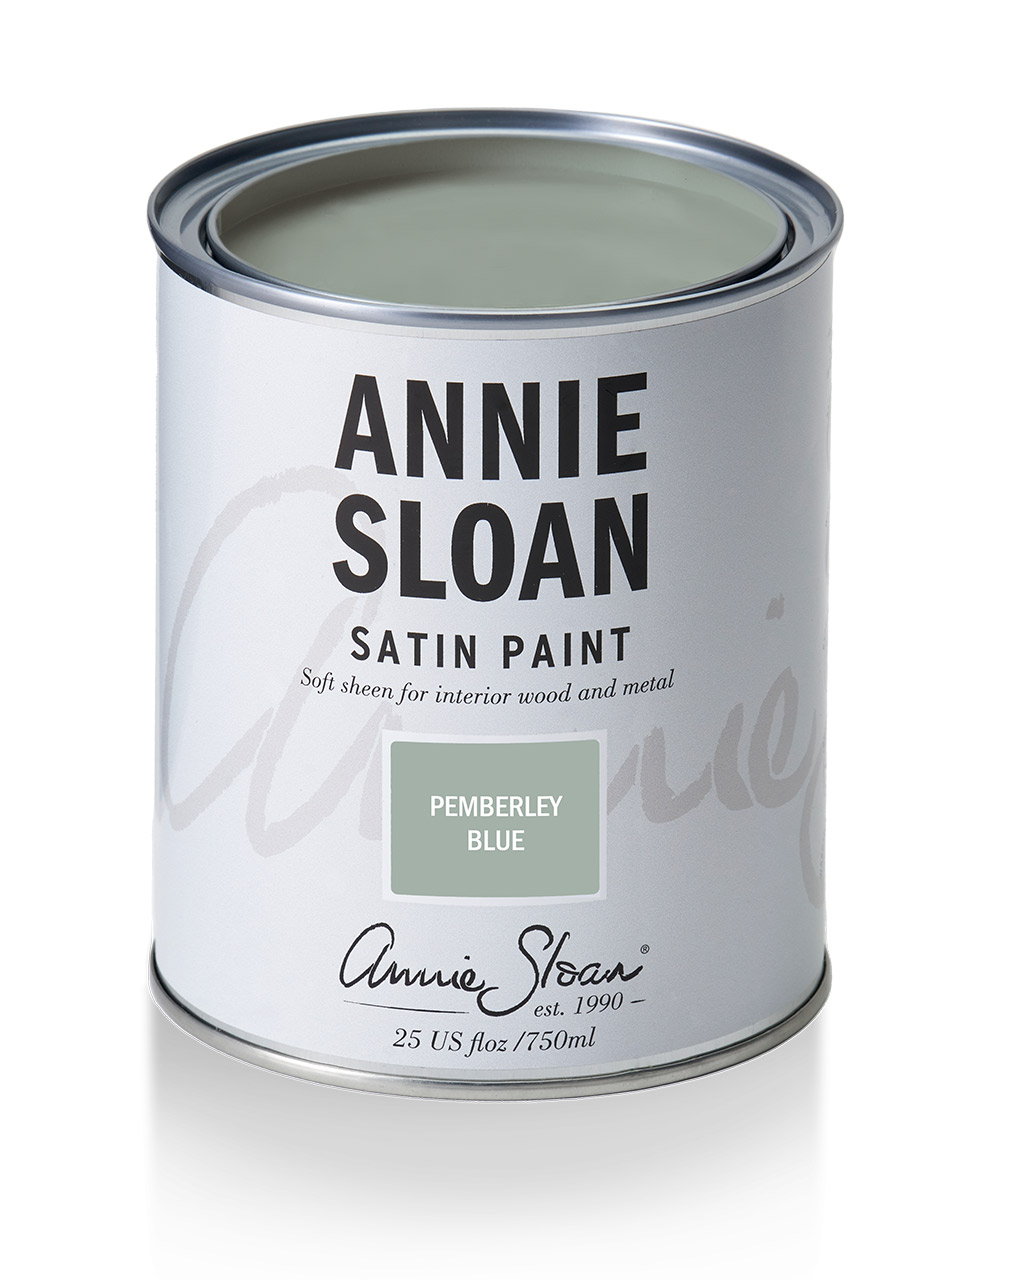 Product shot of Annie Sloan Satin Paint tin in Pemberley Blue